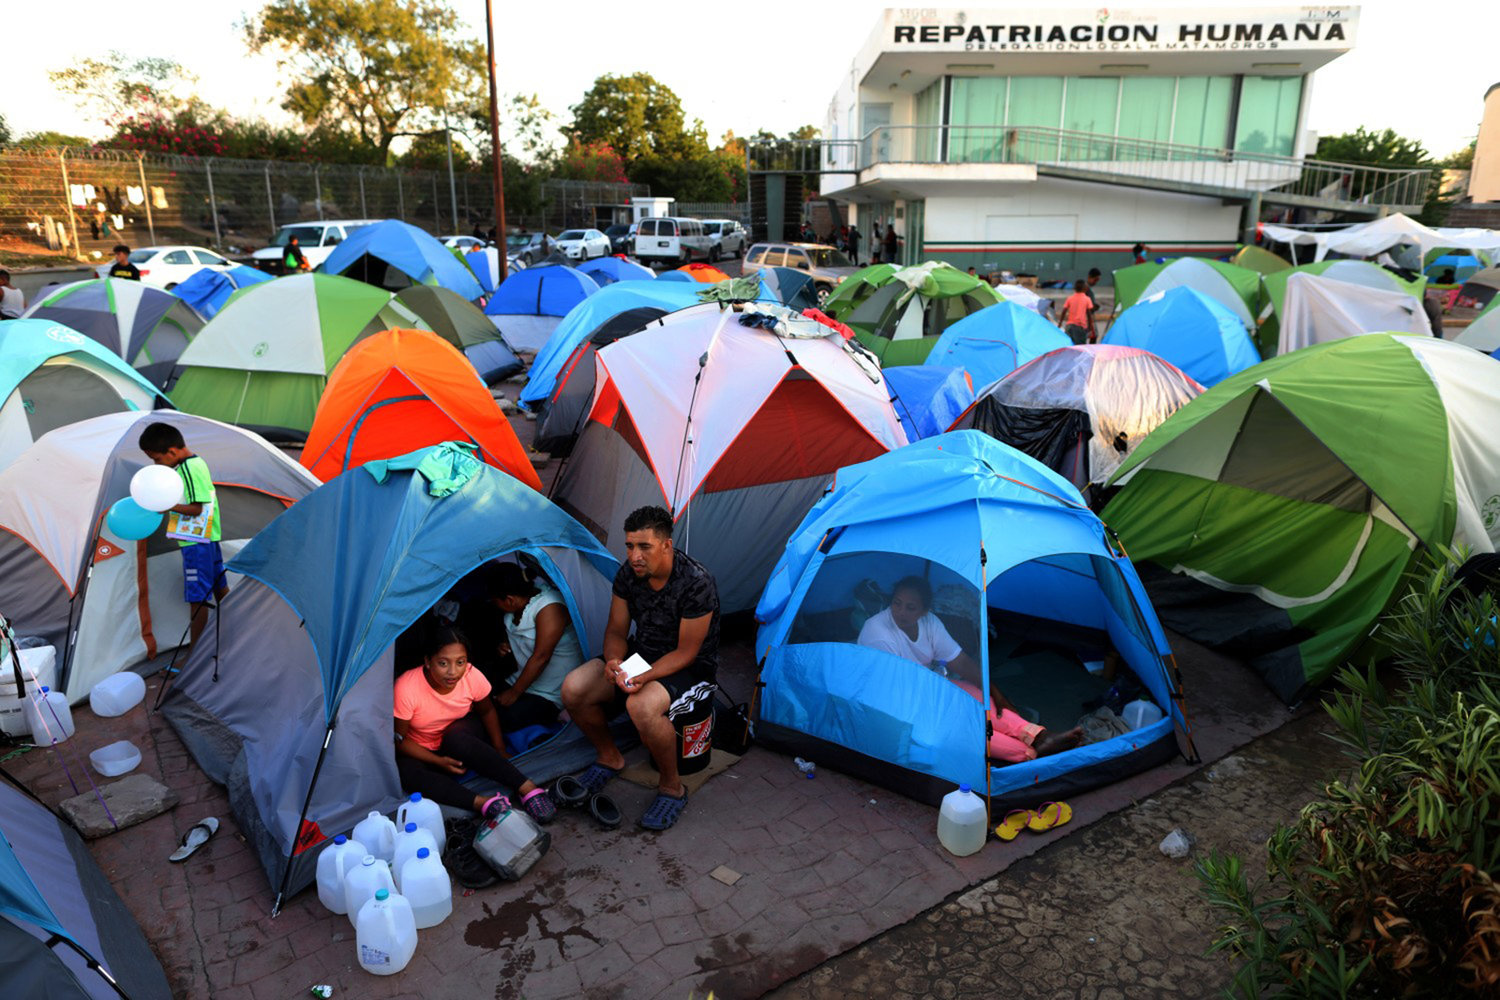 Migrants from Central America and Mexico await the outcome of their U.S. immigration court cases in a tent encampment near the Gateway International Bridge at the U.S.-Mexico border in Matamoros, Tamaulipas, on Oct. 1, 2019. (Gary Coronado/Los Angeles Times/TNS)